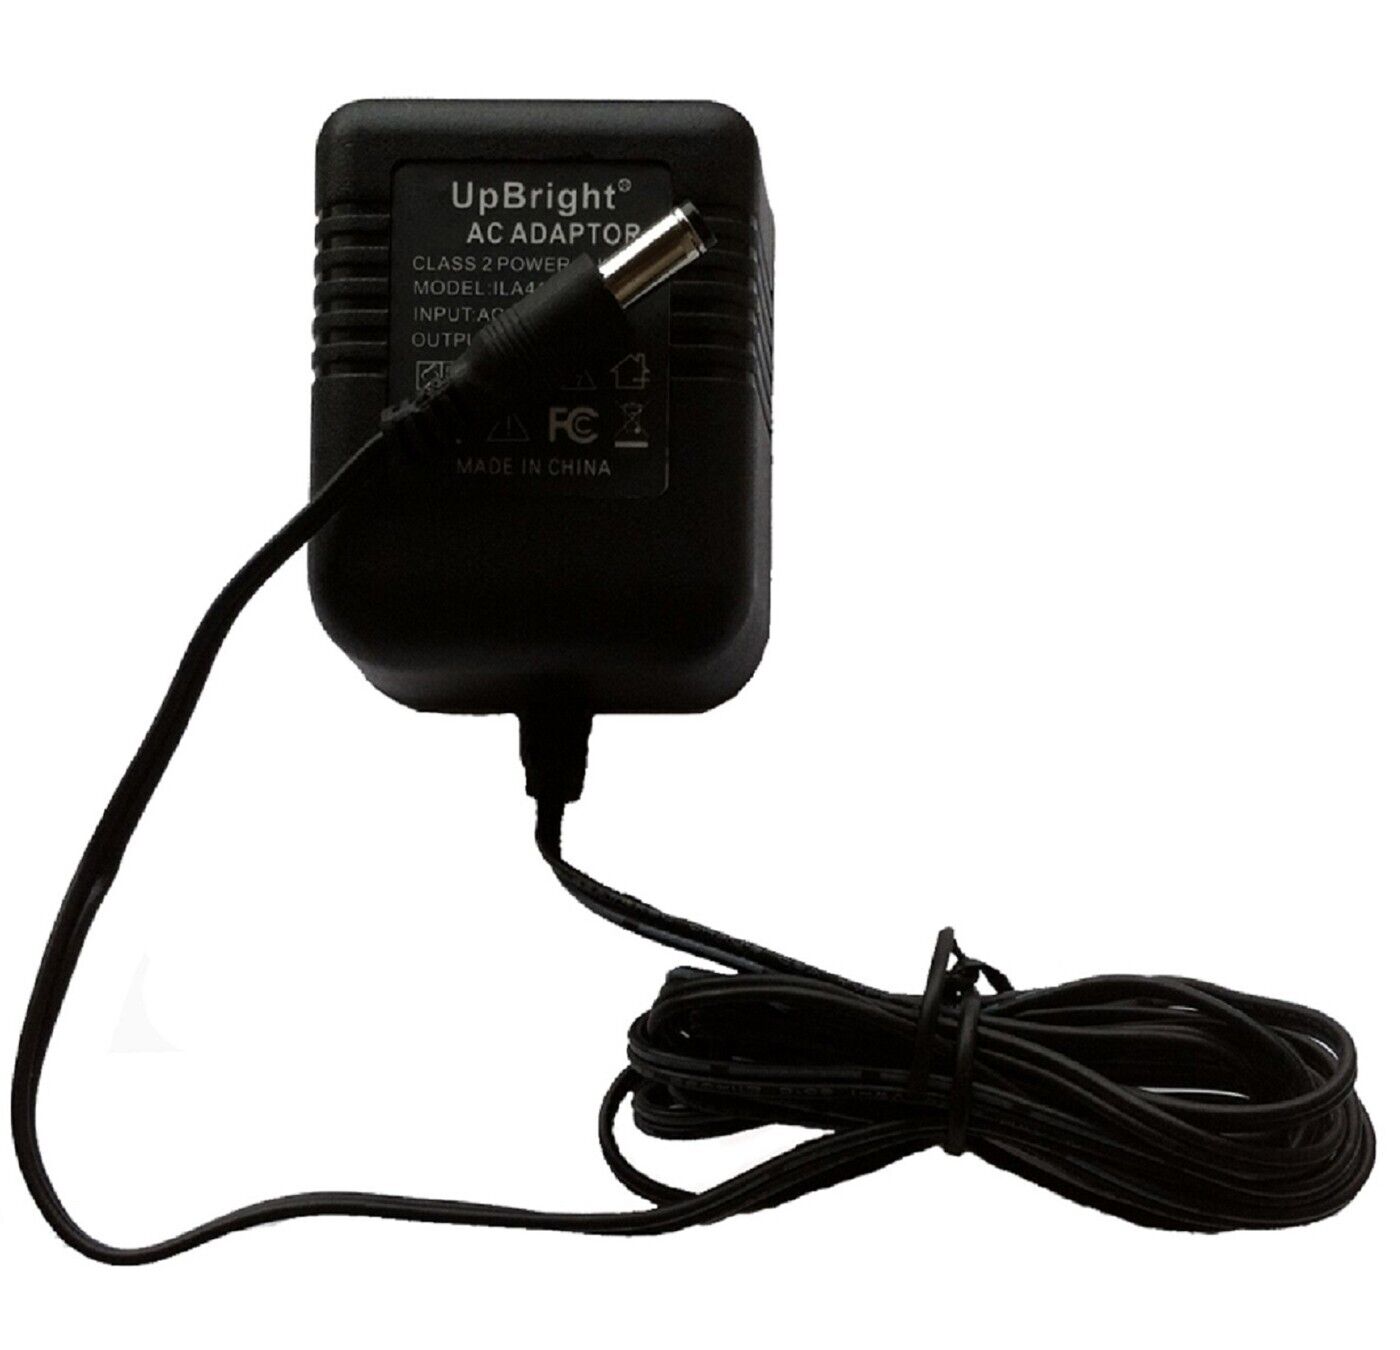 12V AC Adapter For Department 56 810809 Village Accessories Fun At the Dog Park